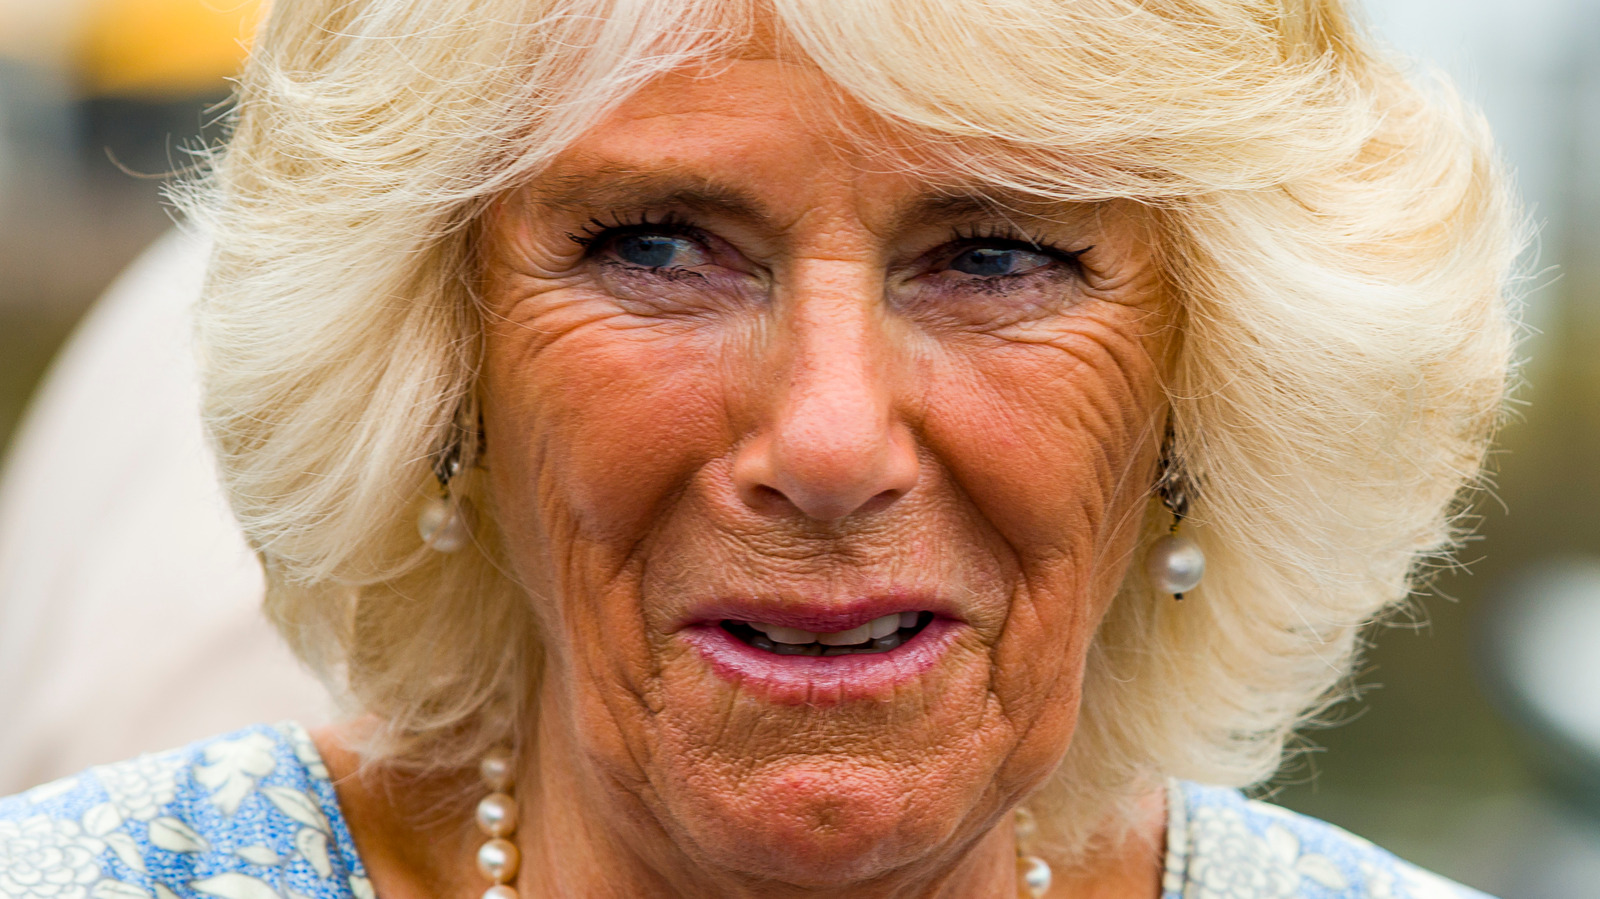 Why Insiders Think Camilla Saved Charles' Relationship With The Queen